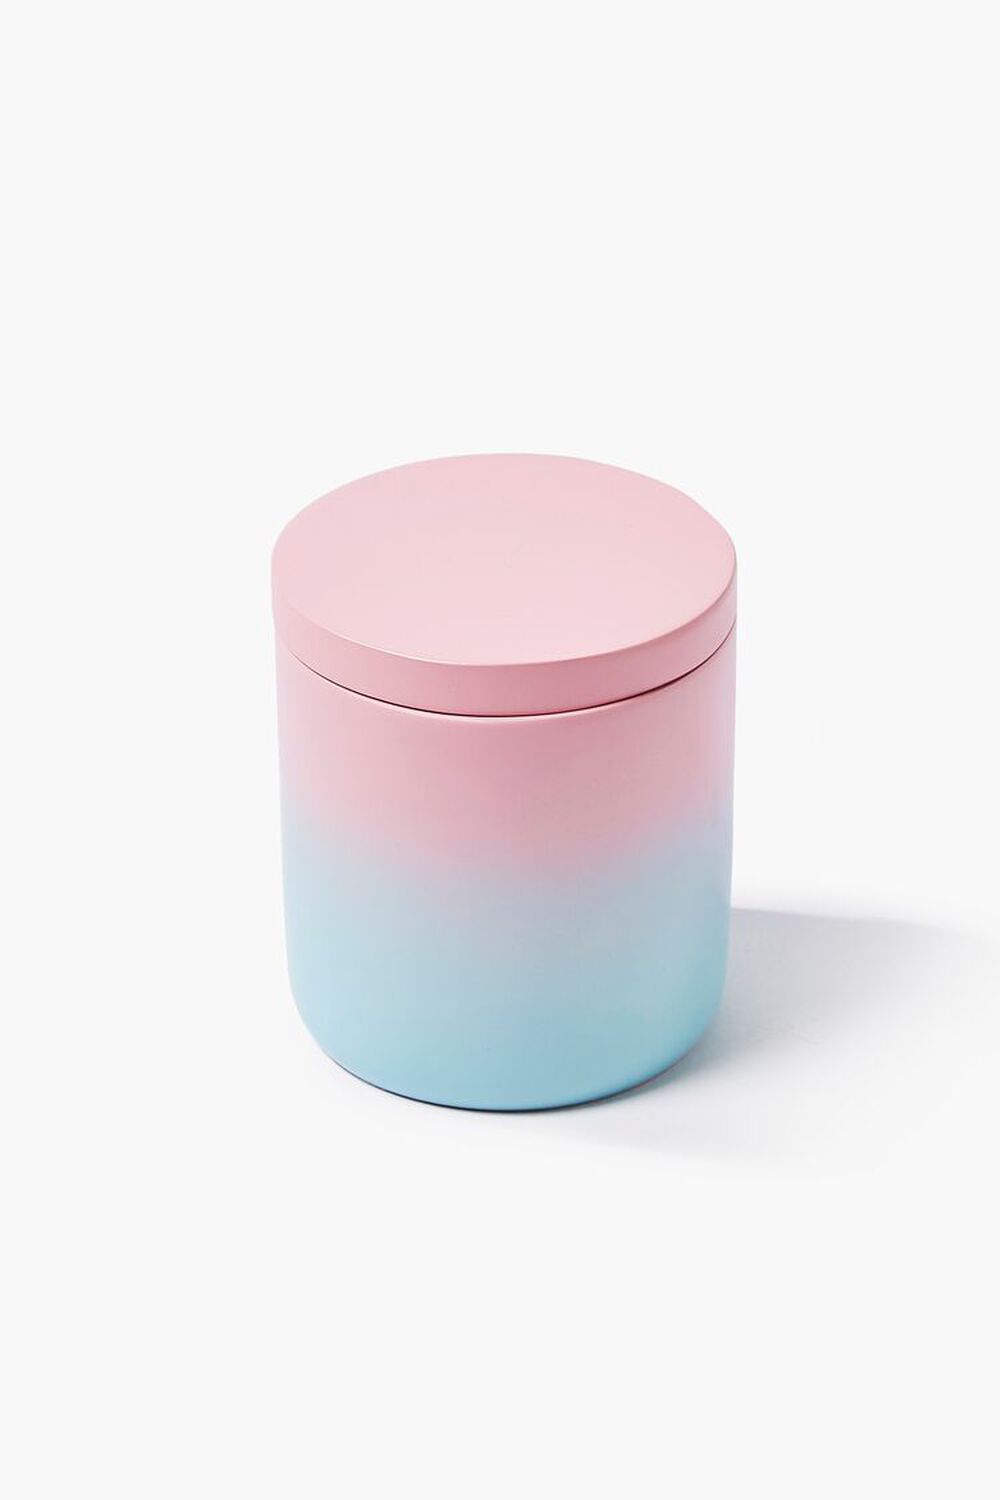 PINK/BLUE Ombre Resin Canister, image 1